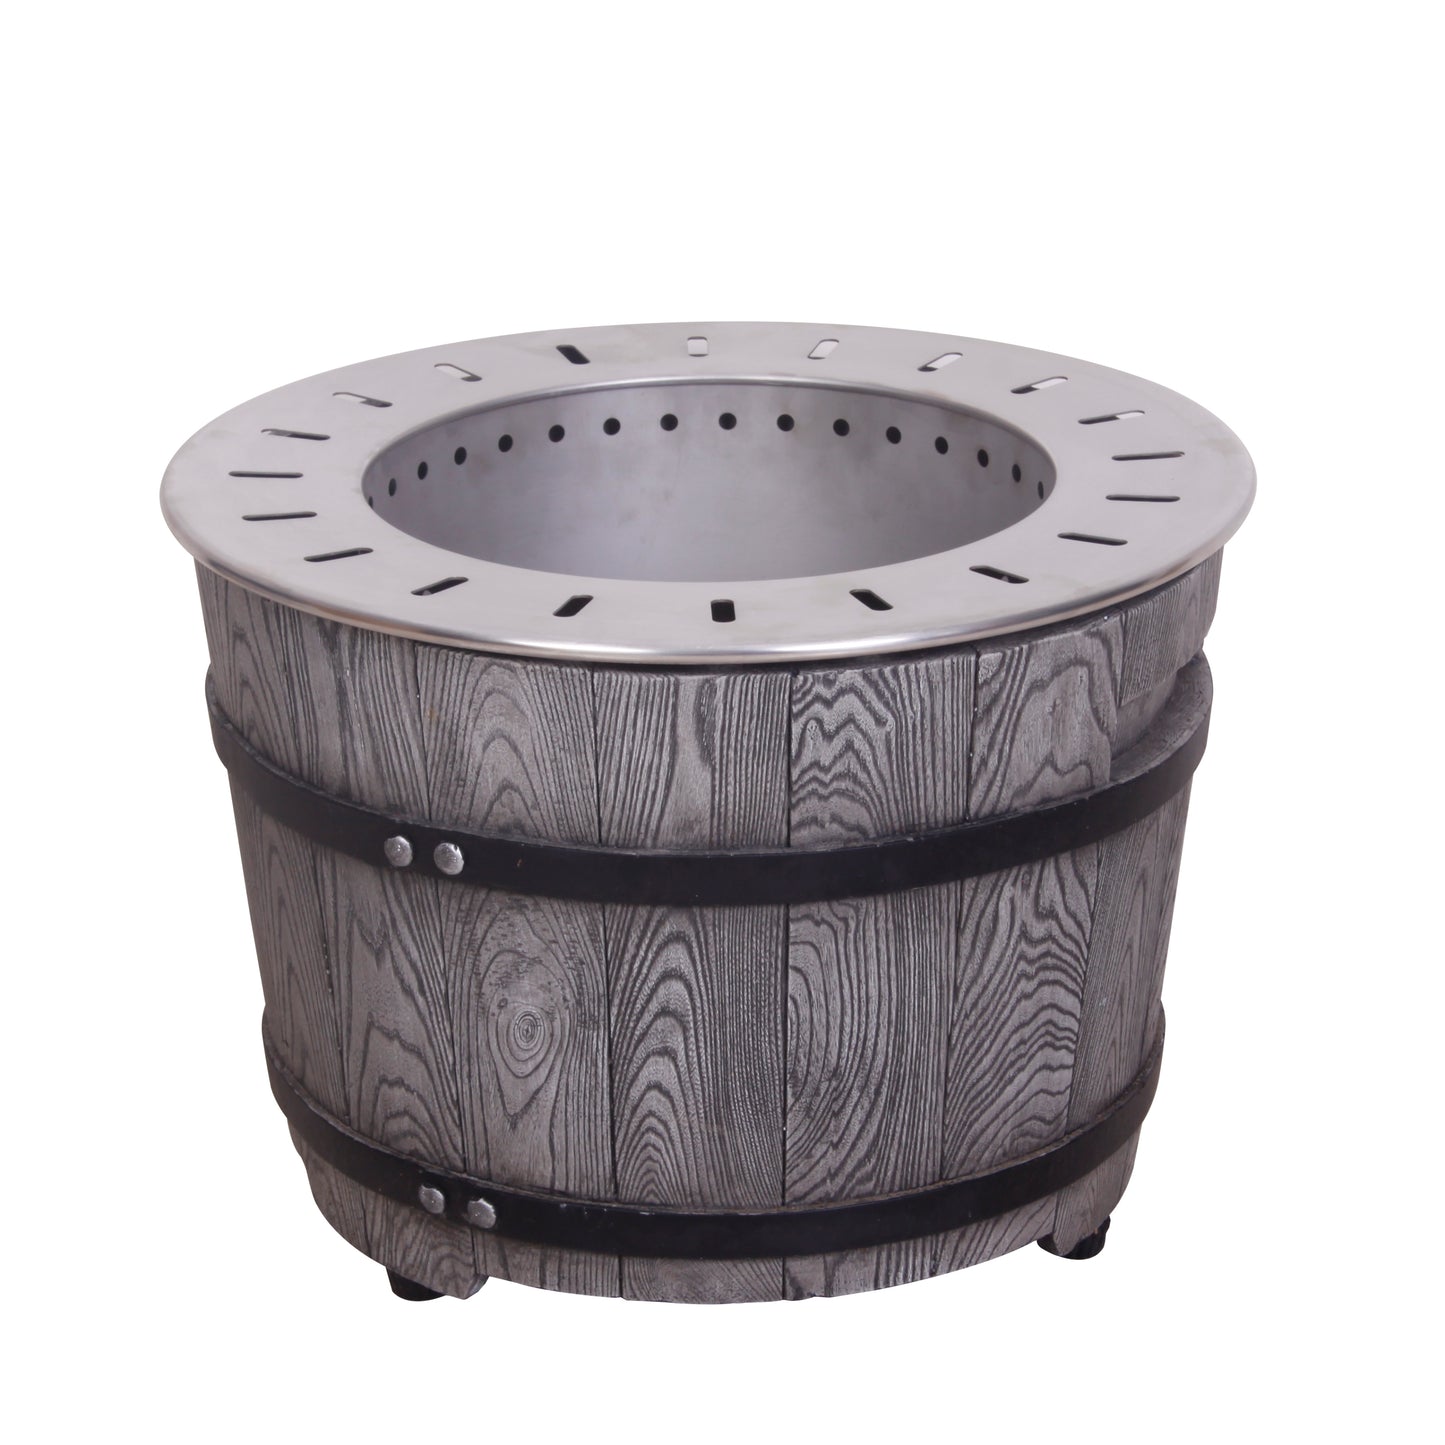 Wood-Look Smokeless Firepit with Hassle-Free Setup and Weather-Resistant Material